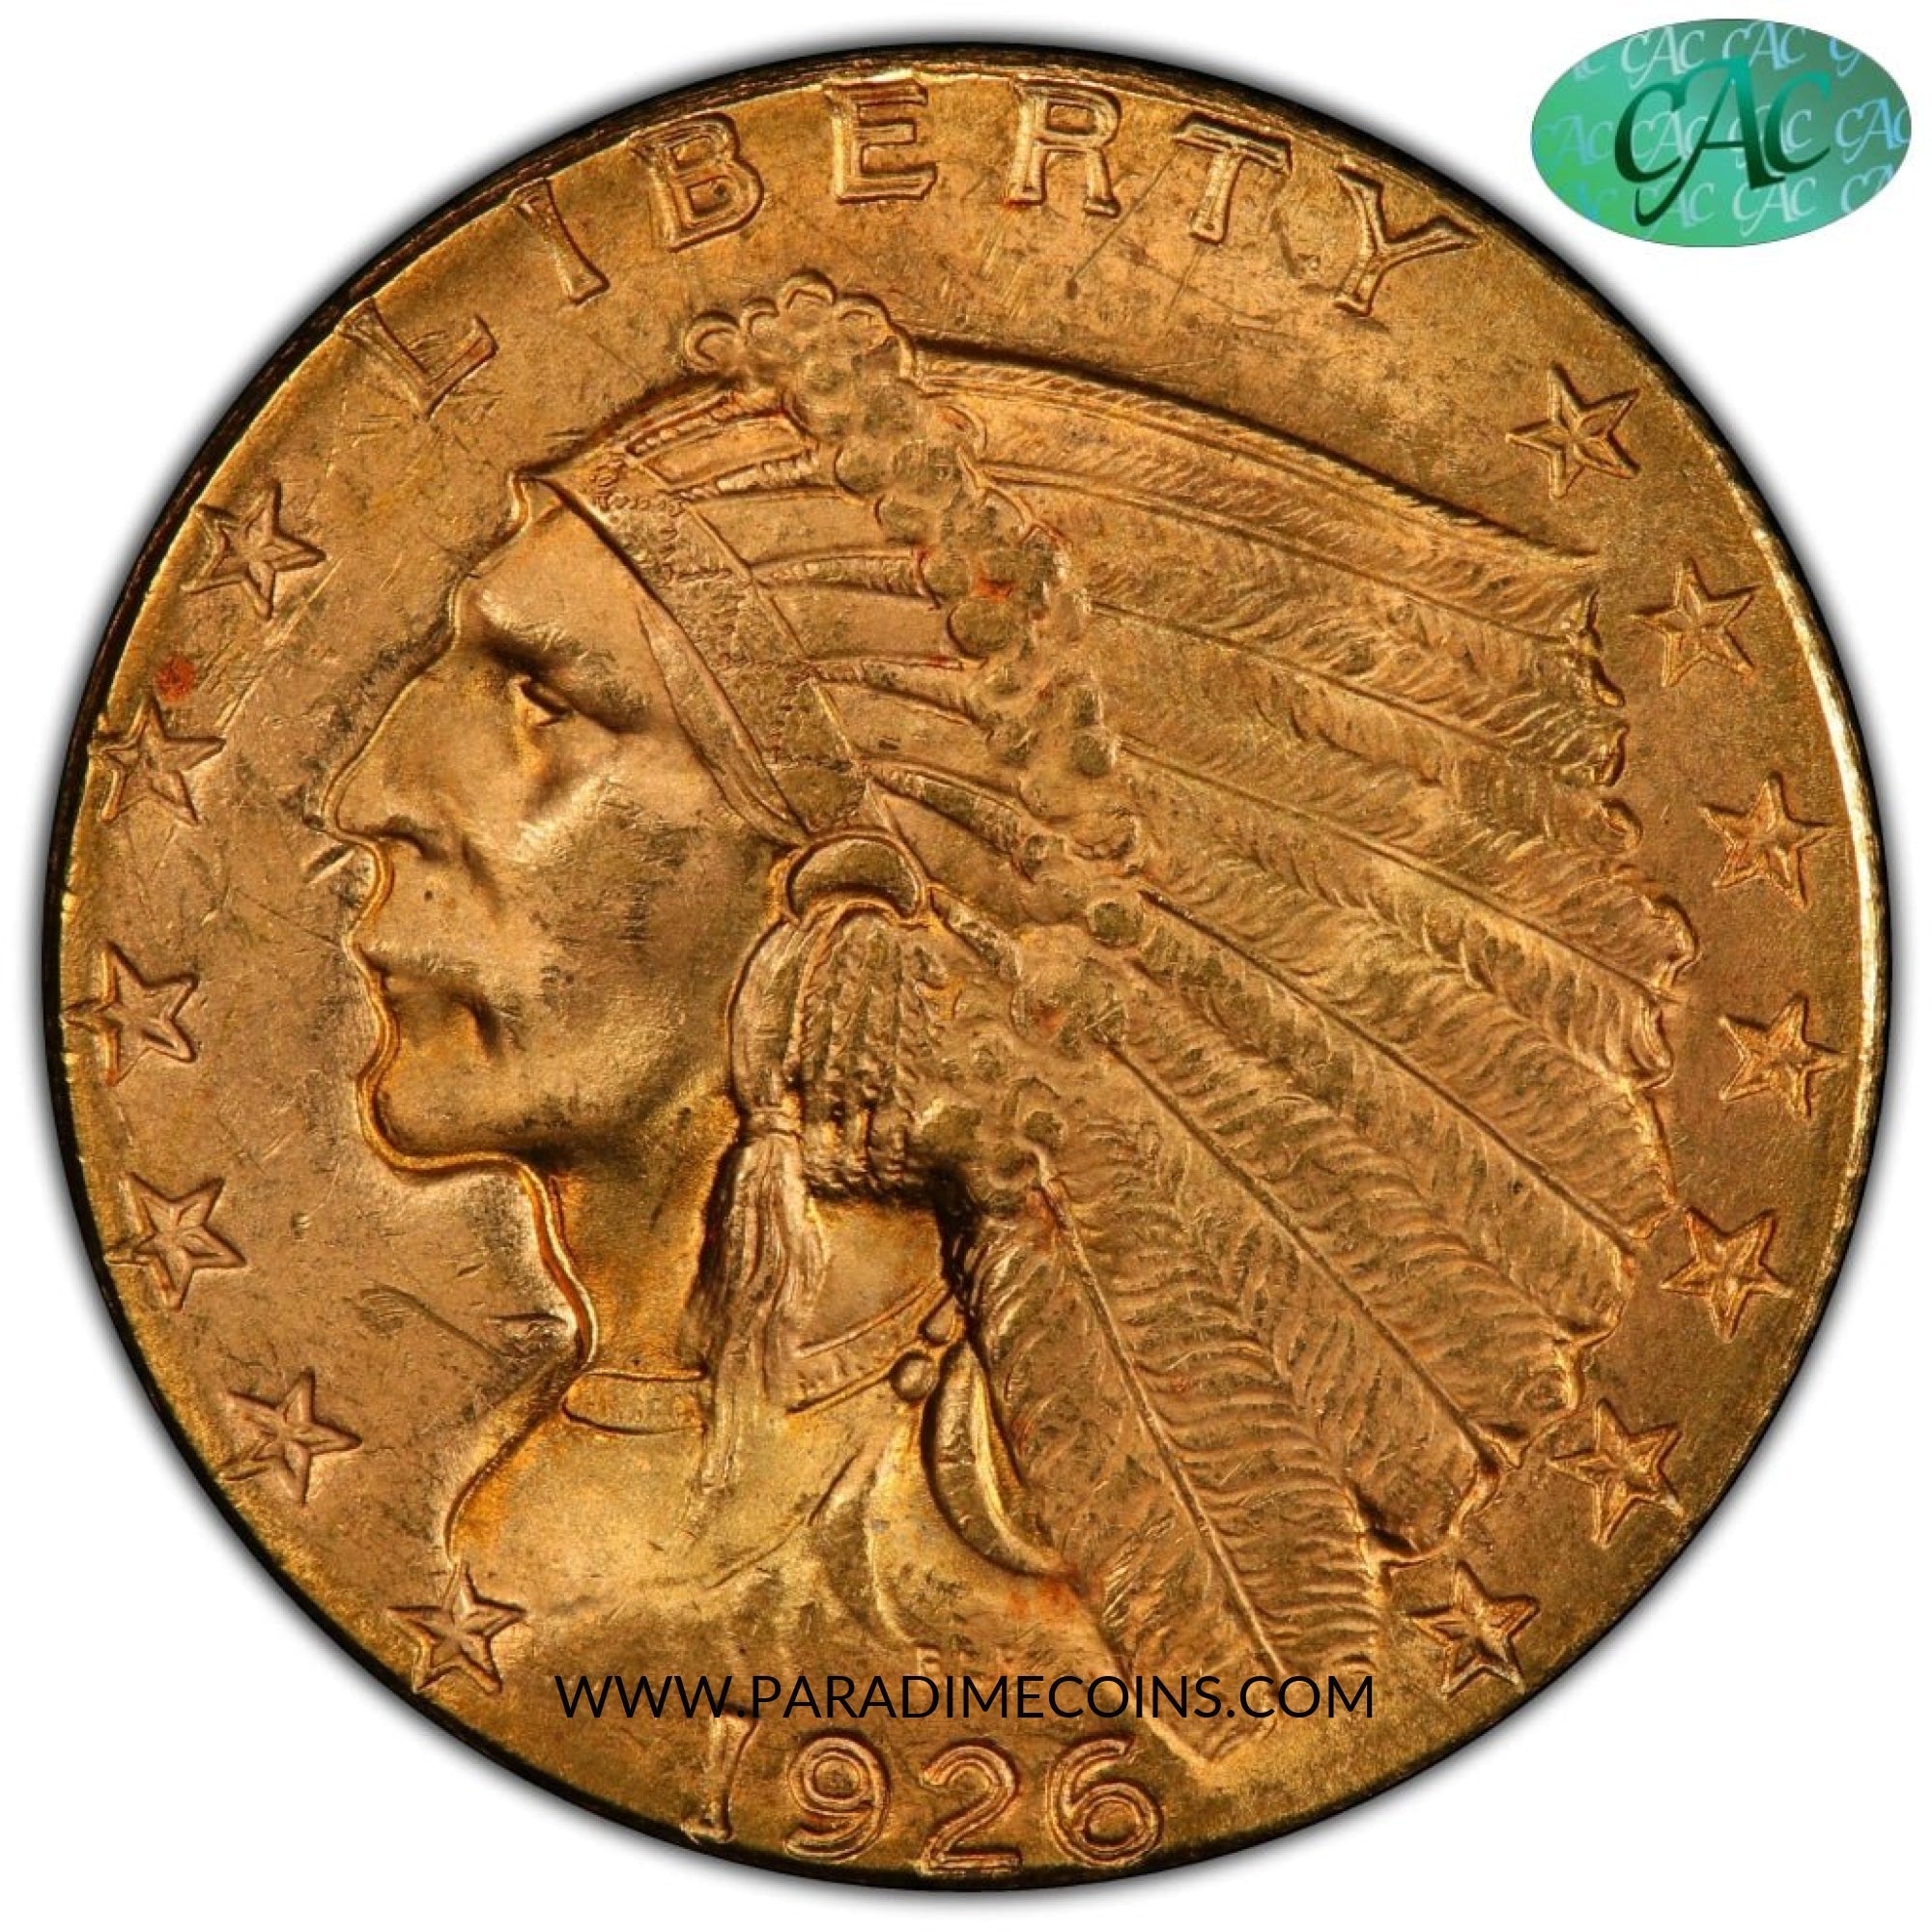 1926 $2.5 MS64 PCGS CAC - Paradime Coins | PCGS NGC CACG CAC Rare US Numismatic Coins For Sale